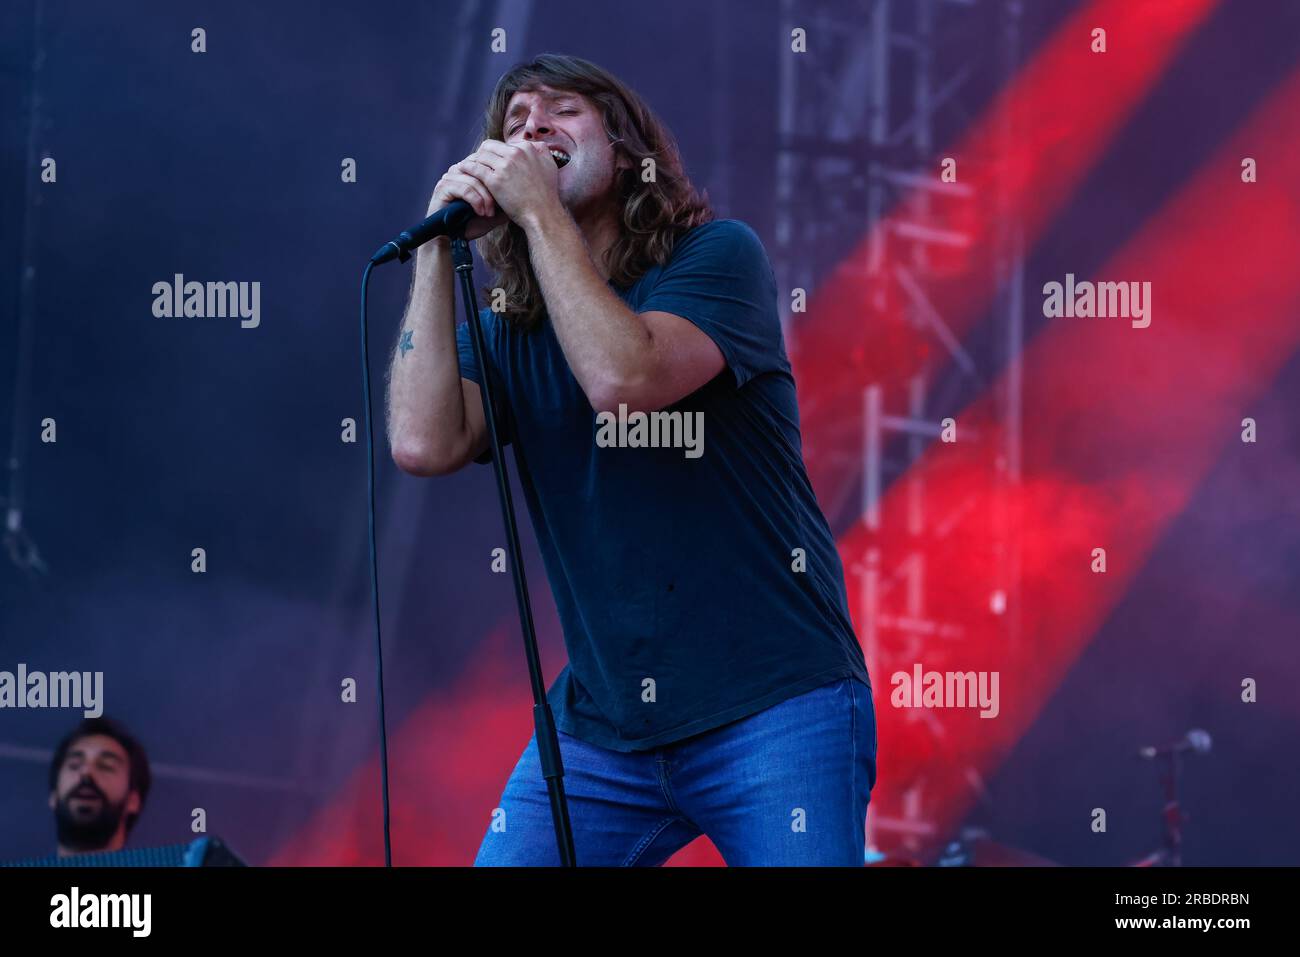 Stanmer Park, City of Brighton & Hove, East Sussex, UK. Paolo Nutini performing at The Brighton Valley Festival 2023, Brighton Valley Concert Series at Stanmer Park to thousands of adoring fans. 8th July 2023. Credit: David Smith/Alamy Live News Stock Photo